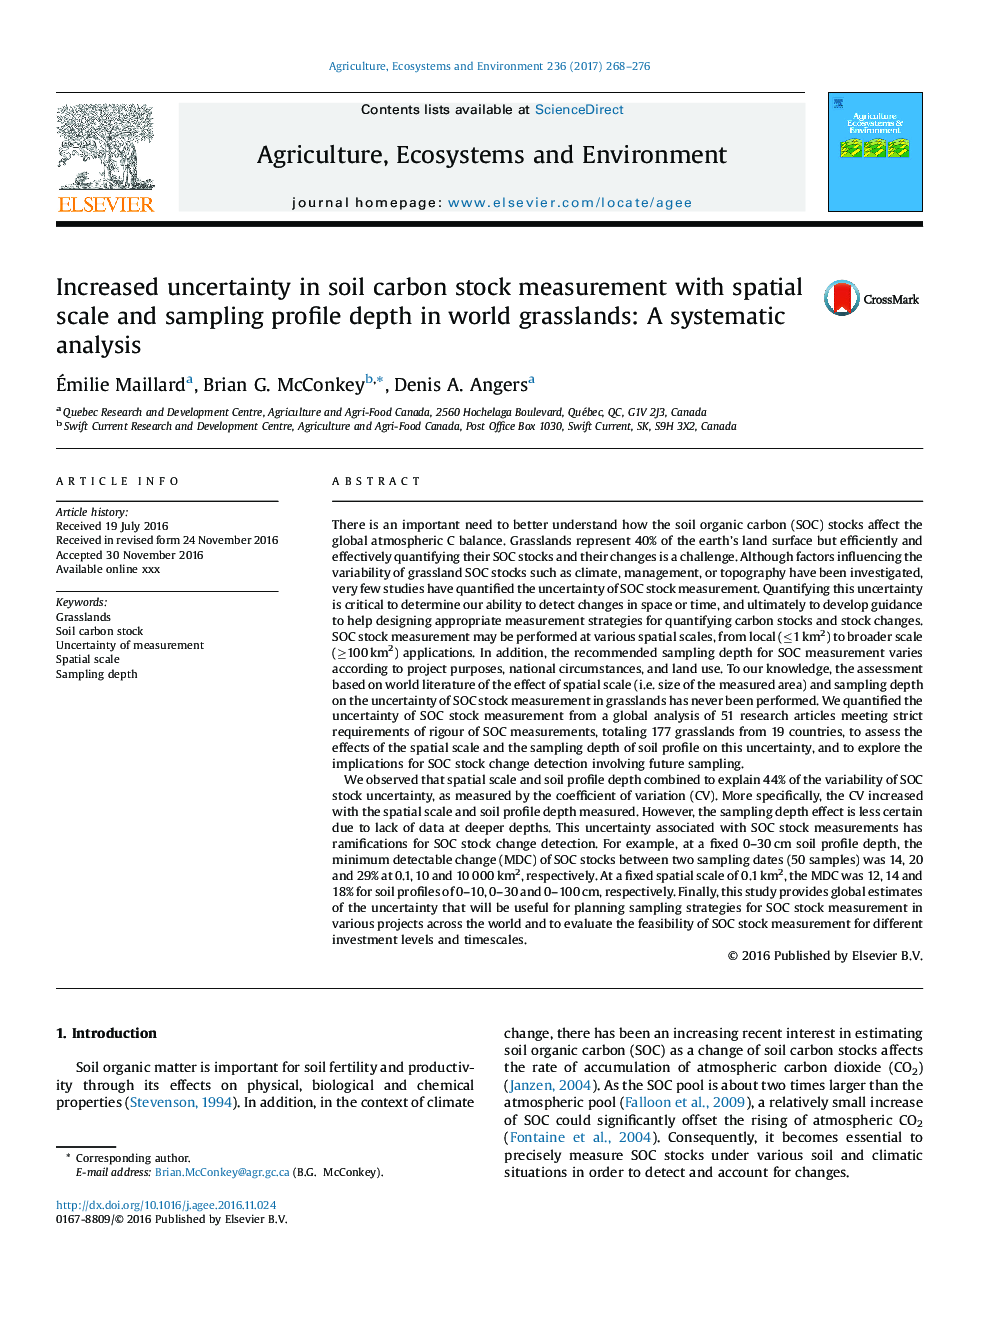 Increased uncertainty in soil carbon stock measurement with spatial scale and sampling profile depth in world grasslands: A systematic analysis